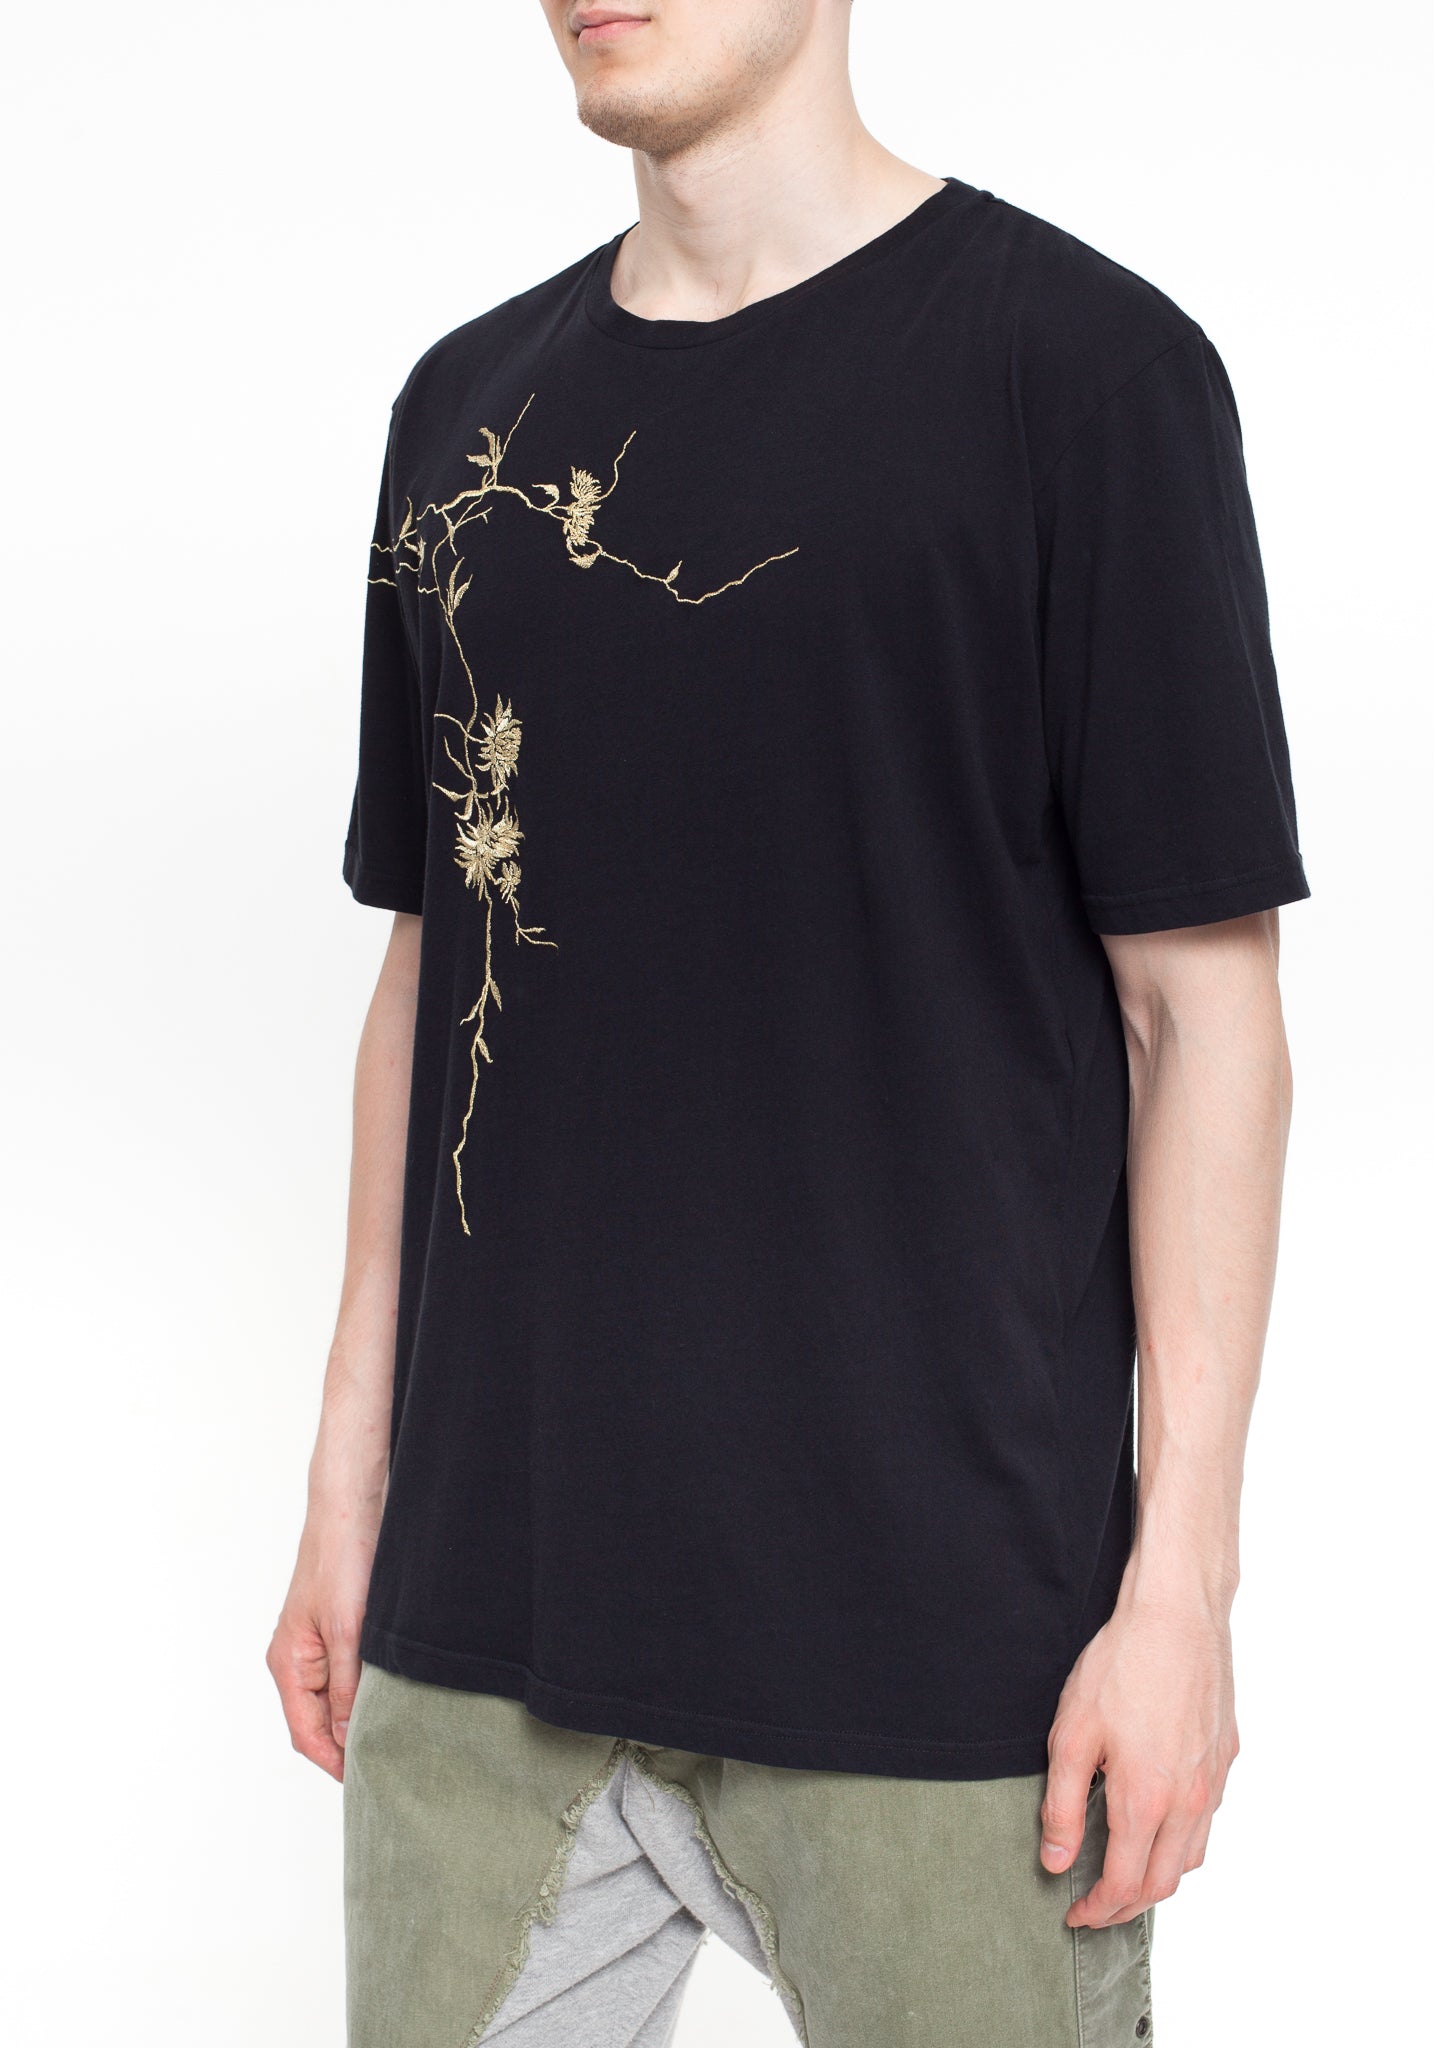 Embroided T-Shirt Awuna